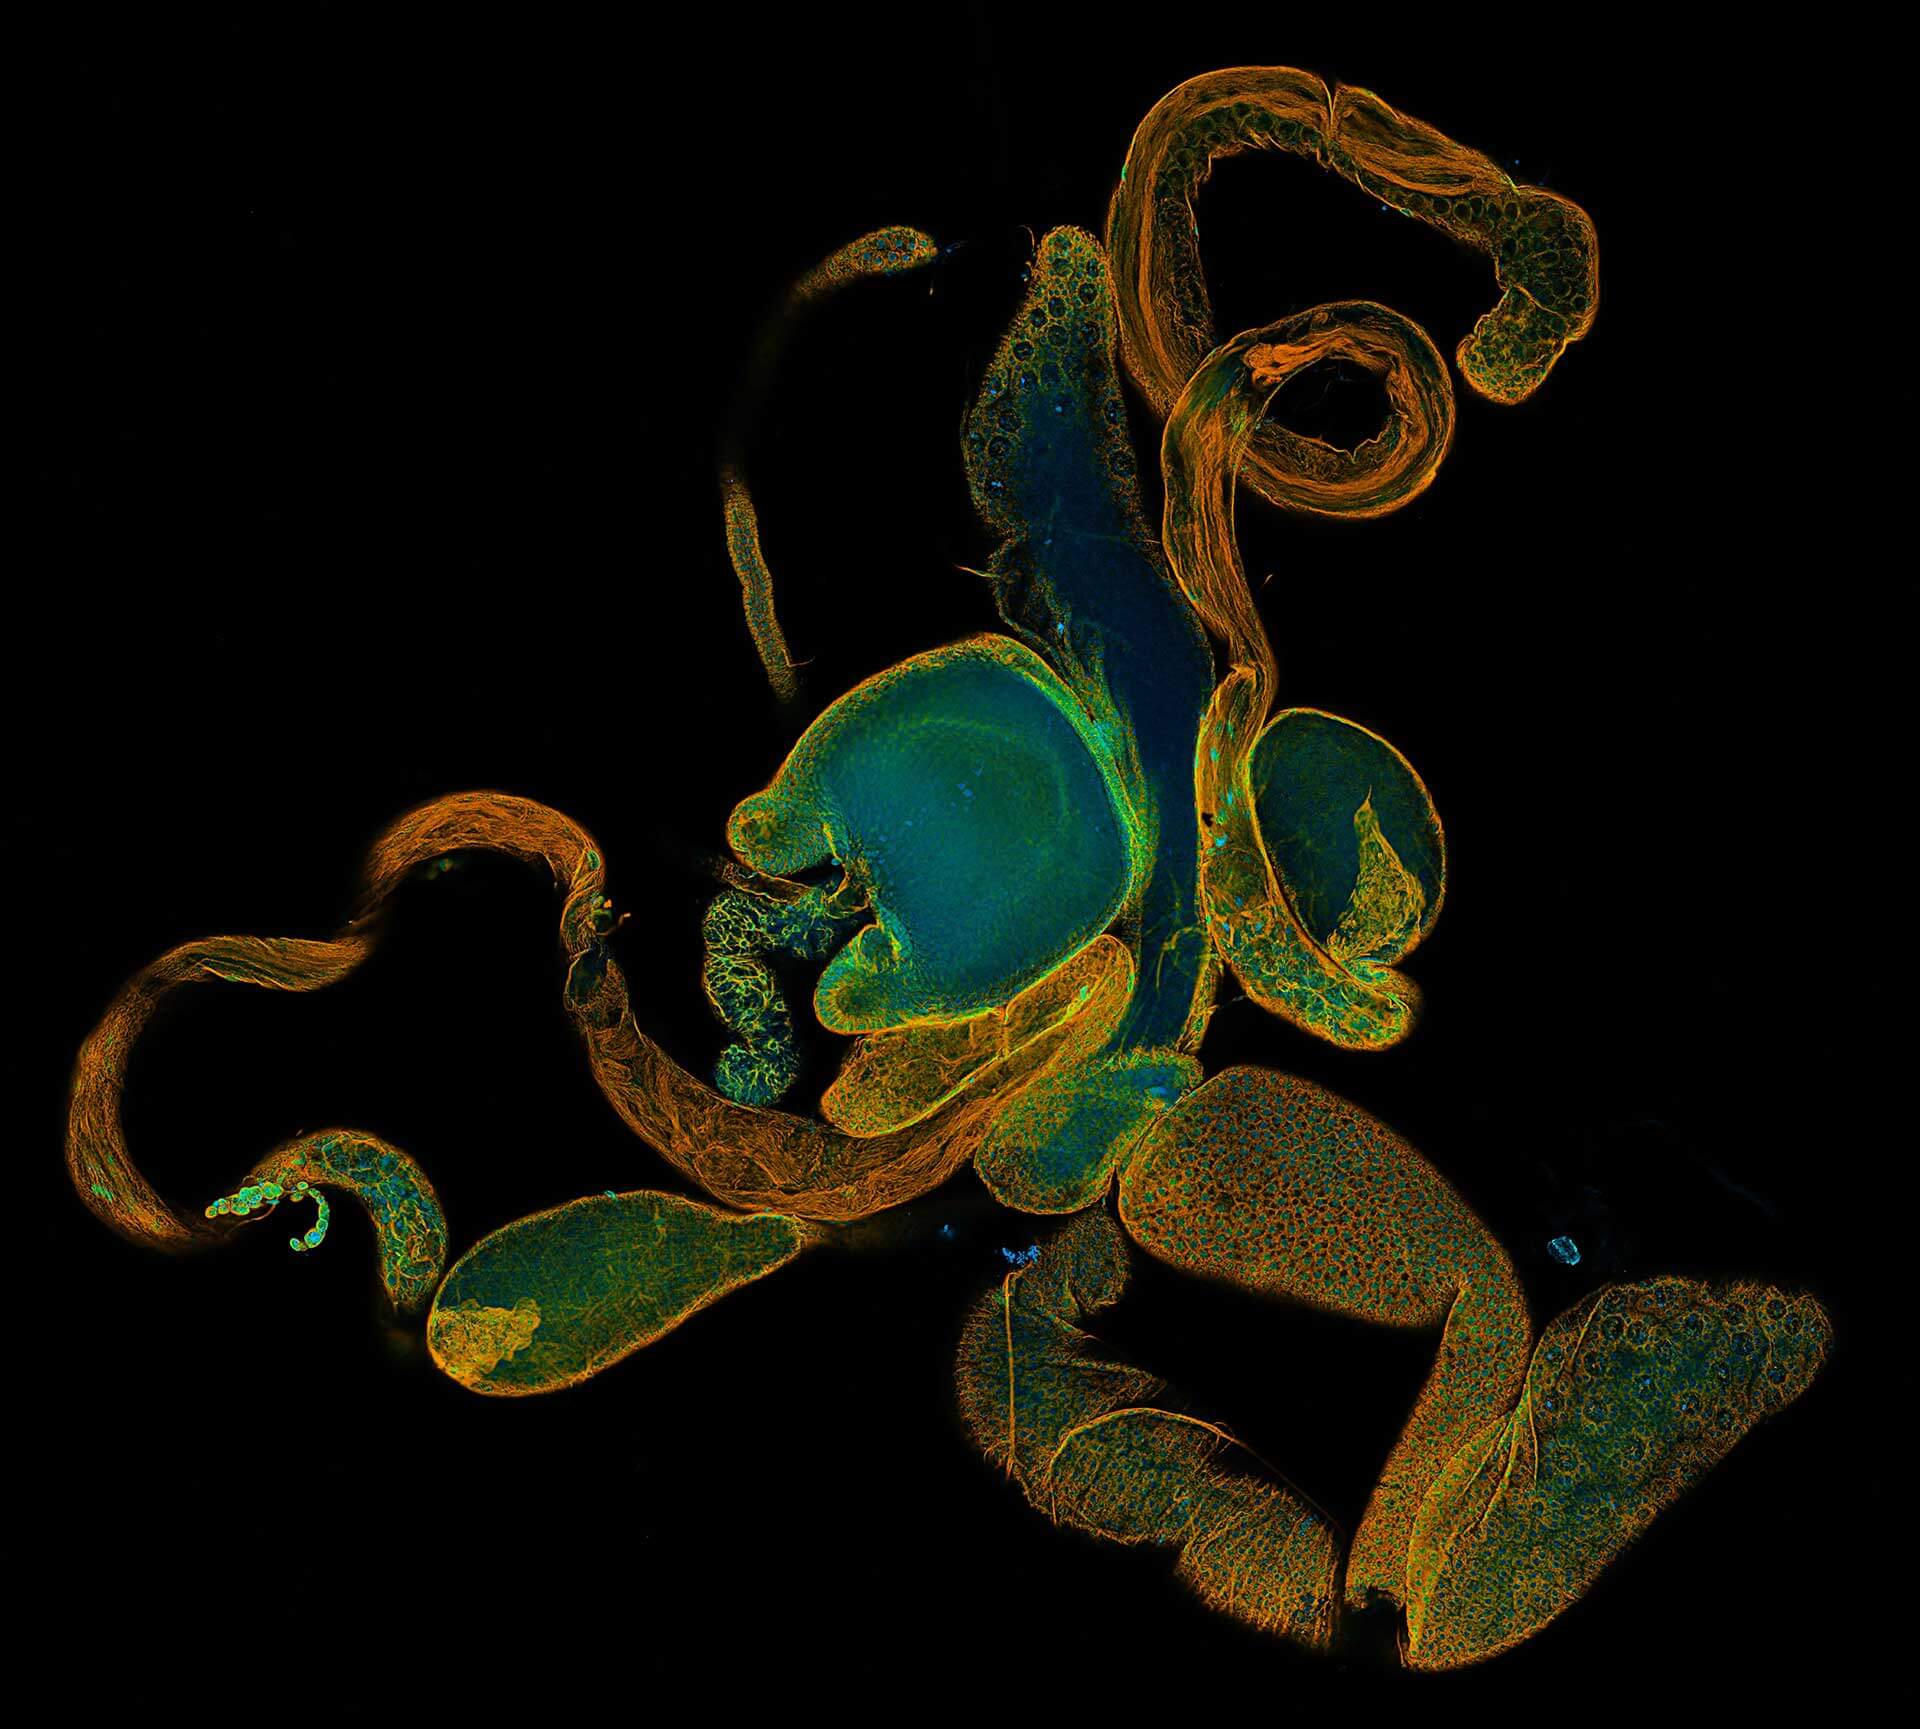 Stitched microscopic image of fruit fly, drosophila, ovariole in basic resolution